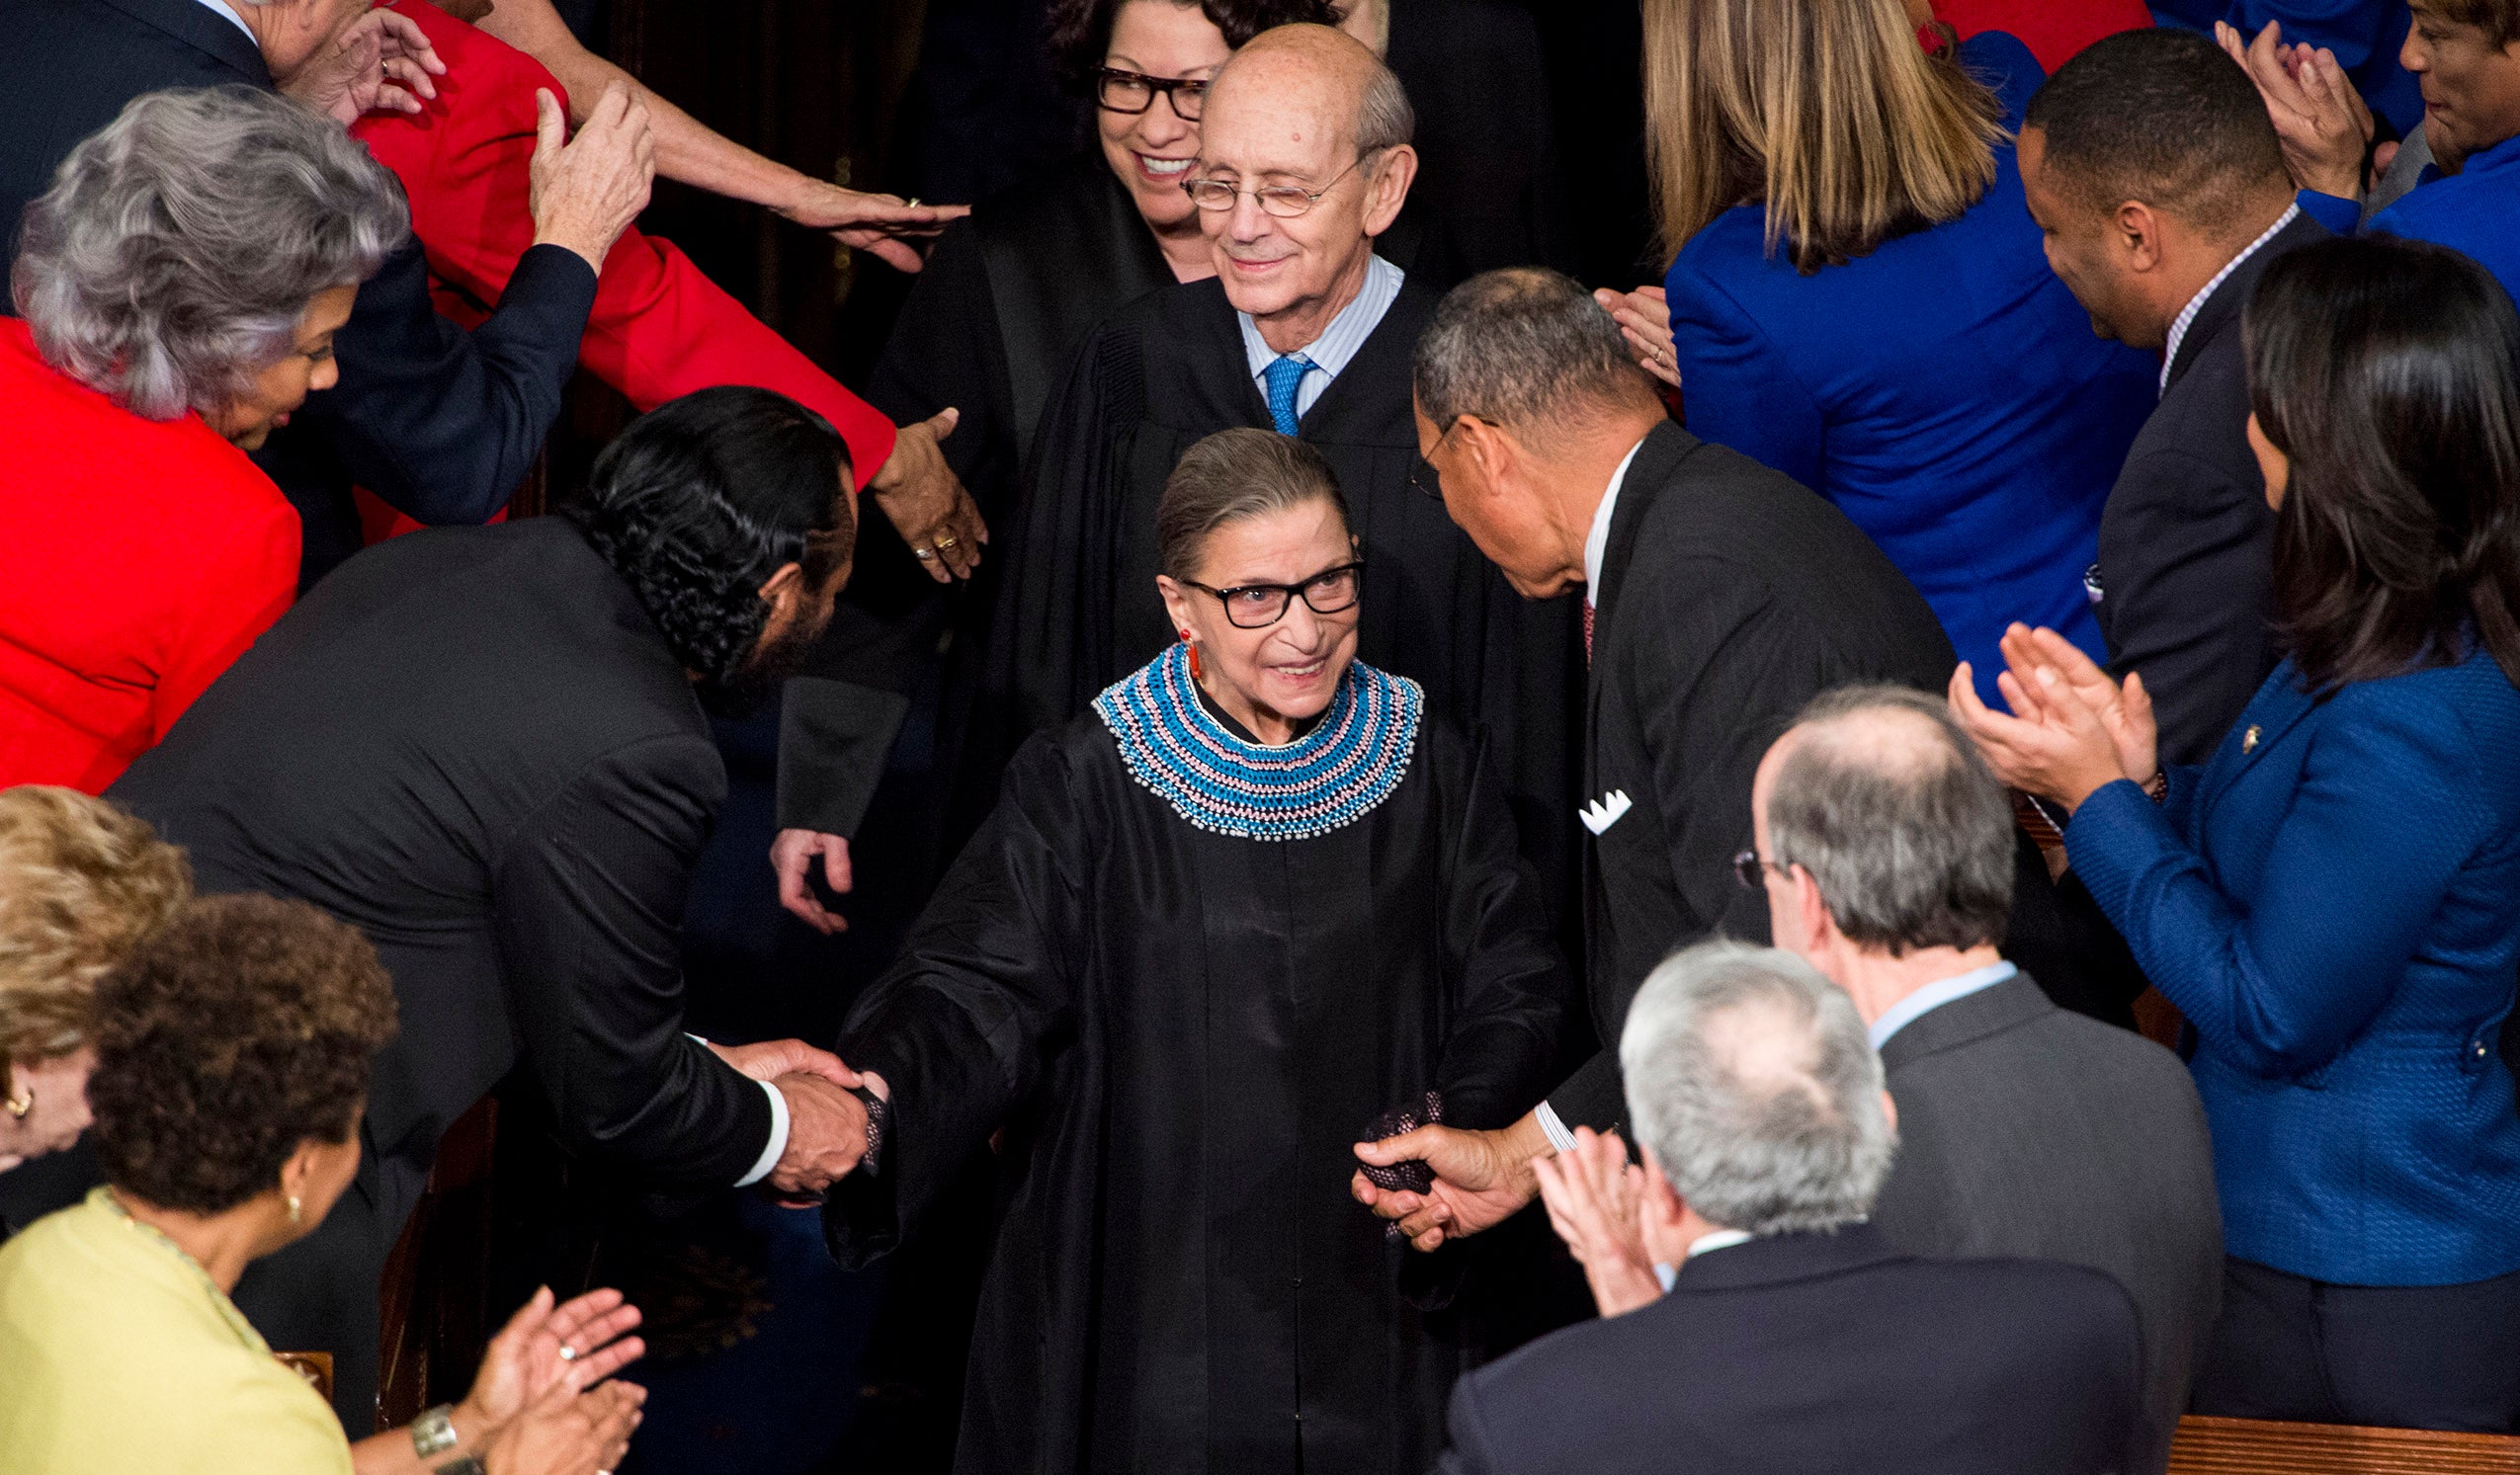 Ruth Bader Ginsburg arriving at the State of The Union, wlaking down the aisle surrounded by justices and members of Congress.